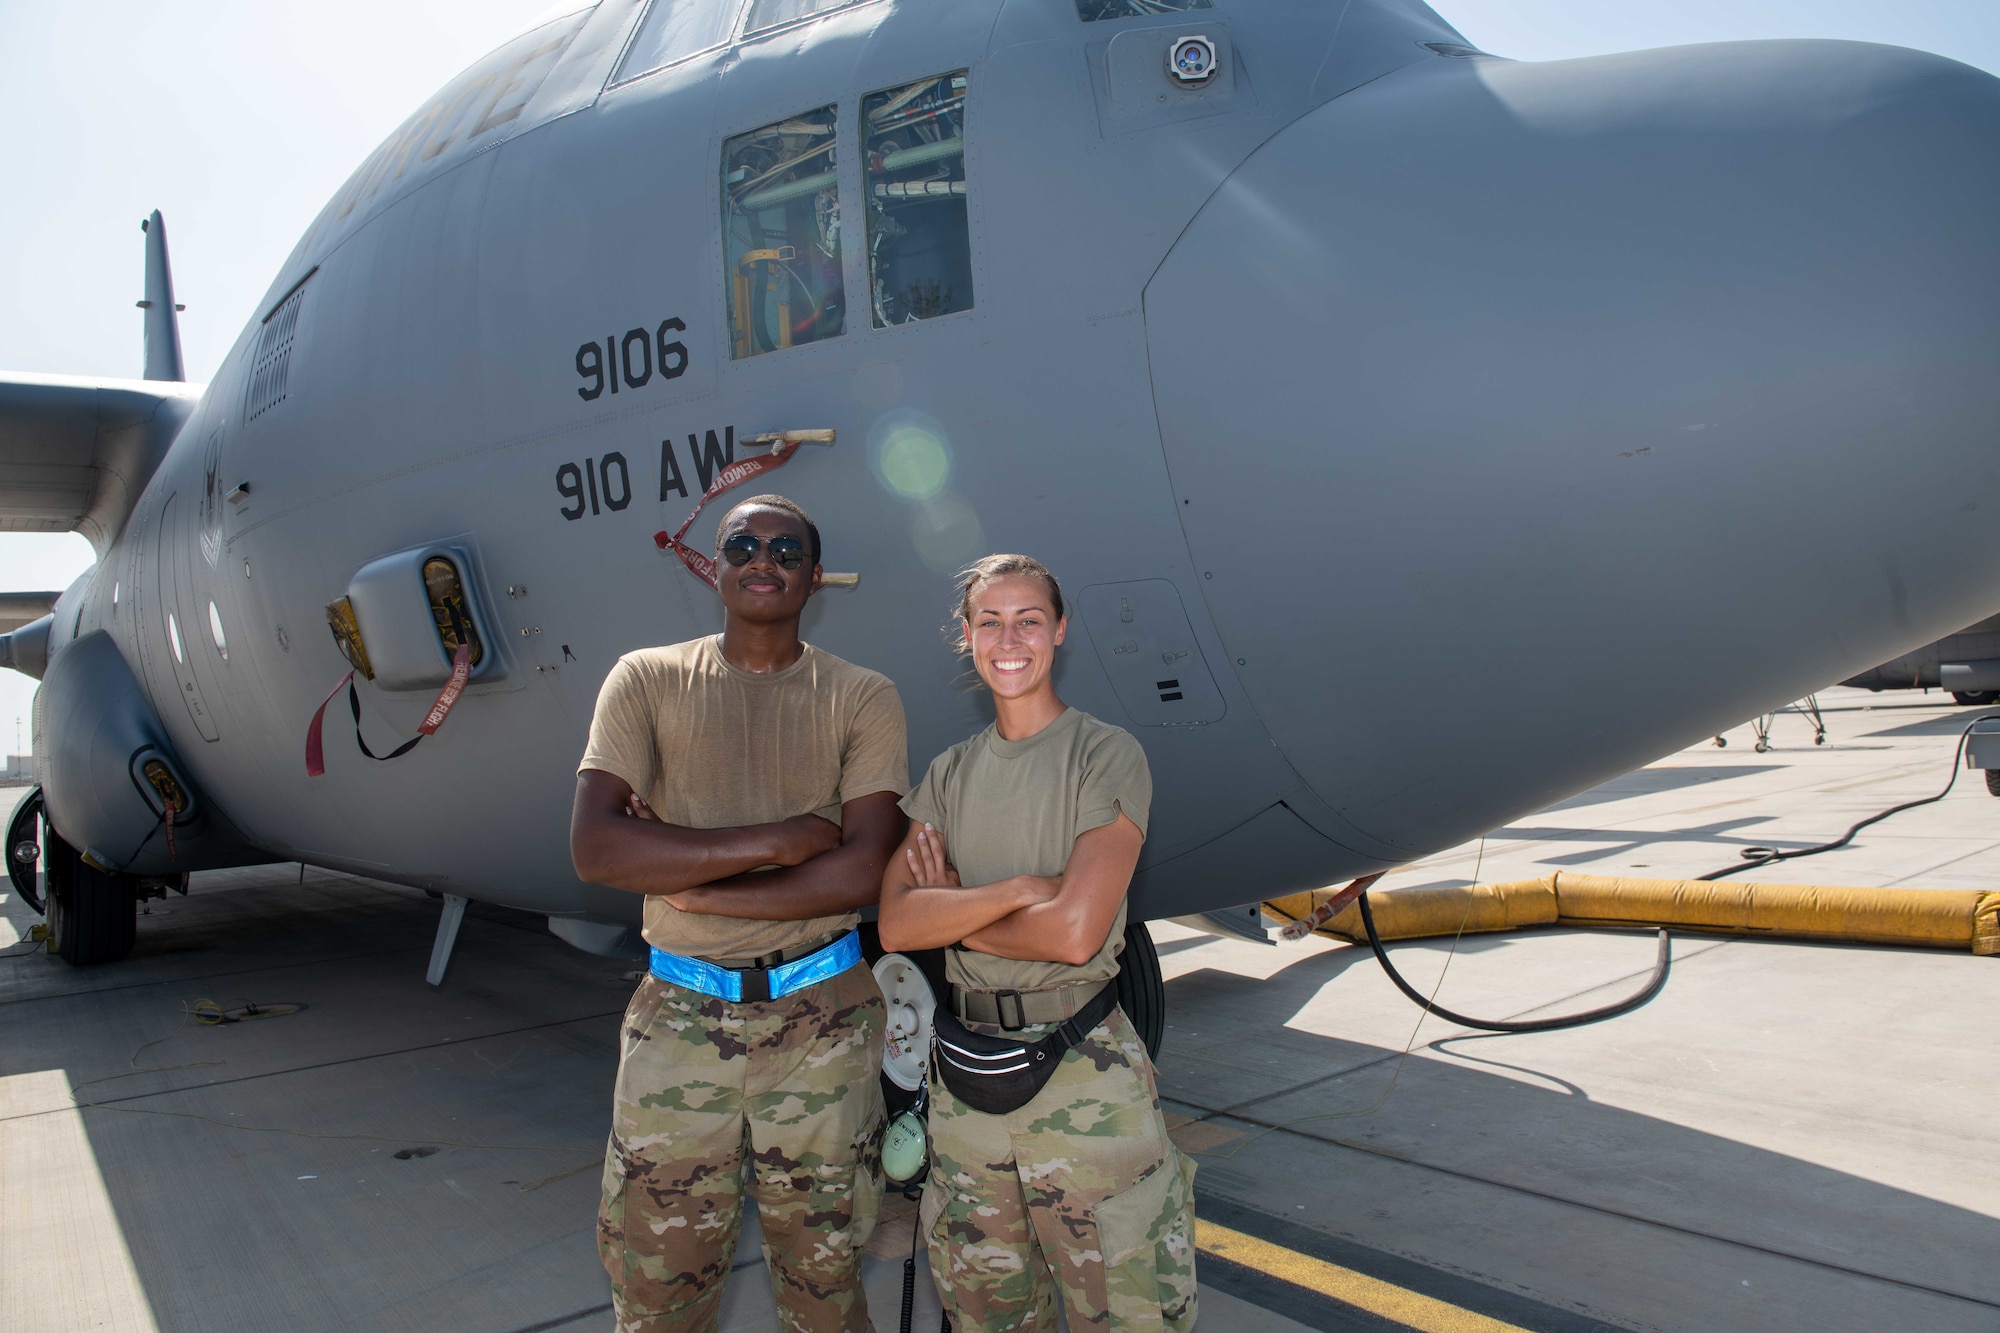 U.S. Air Force Reserve Senior Airman Justin Young (left), and Staff Sgt. Sydnie Schwenk, Airmen from Youngstown, Ohio, currently deployed to Camp Lemonnier, Djibouti, with the 75th Expeditionary Airlift Squadron "Rogue Squadron", stand in front of a C-130 Hercules assigned to the squadron, May 3, 2022.